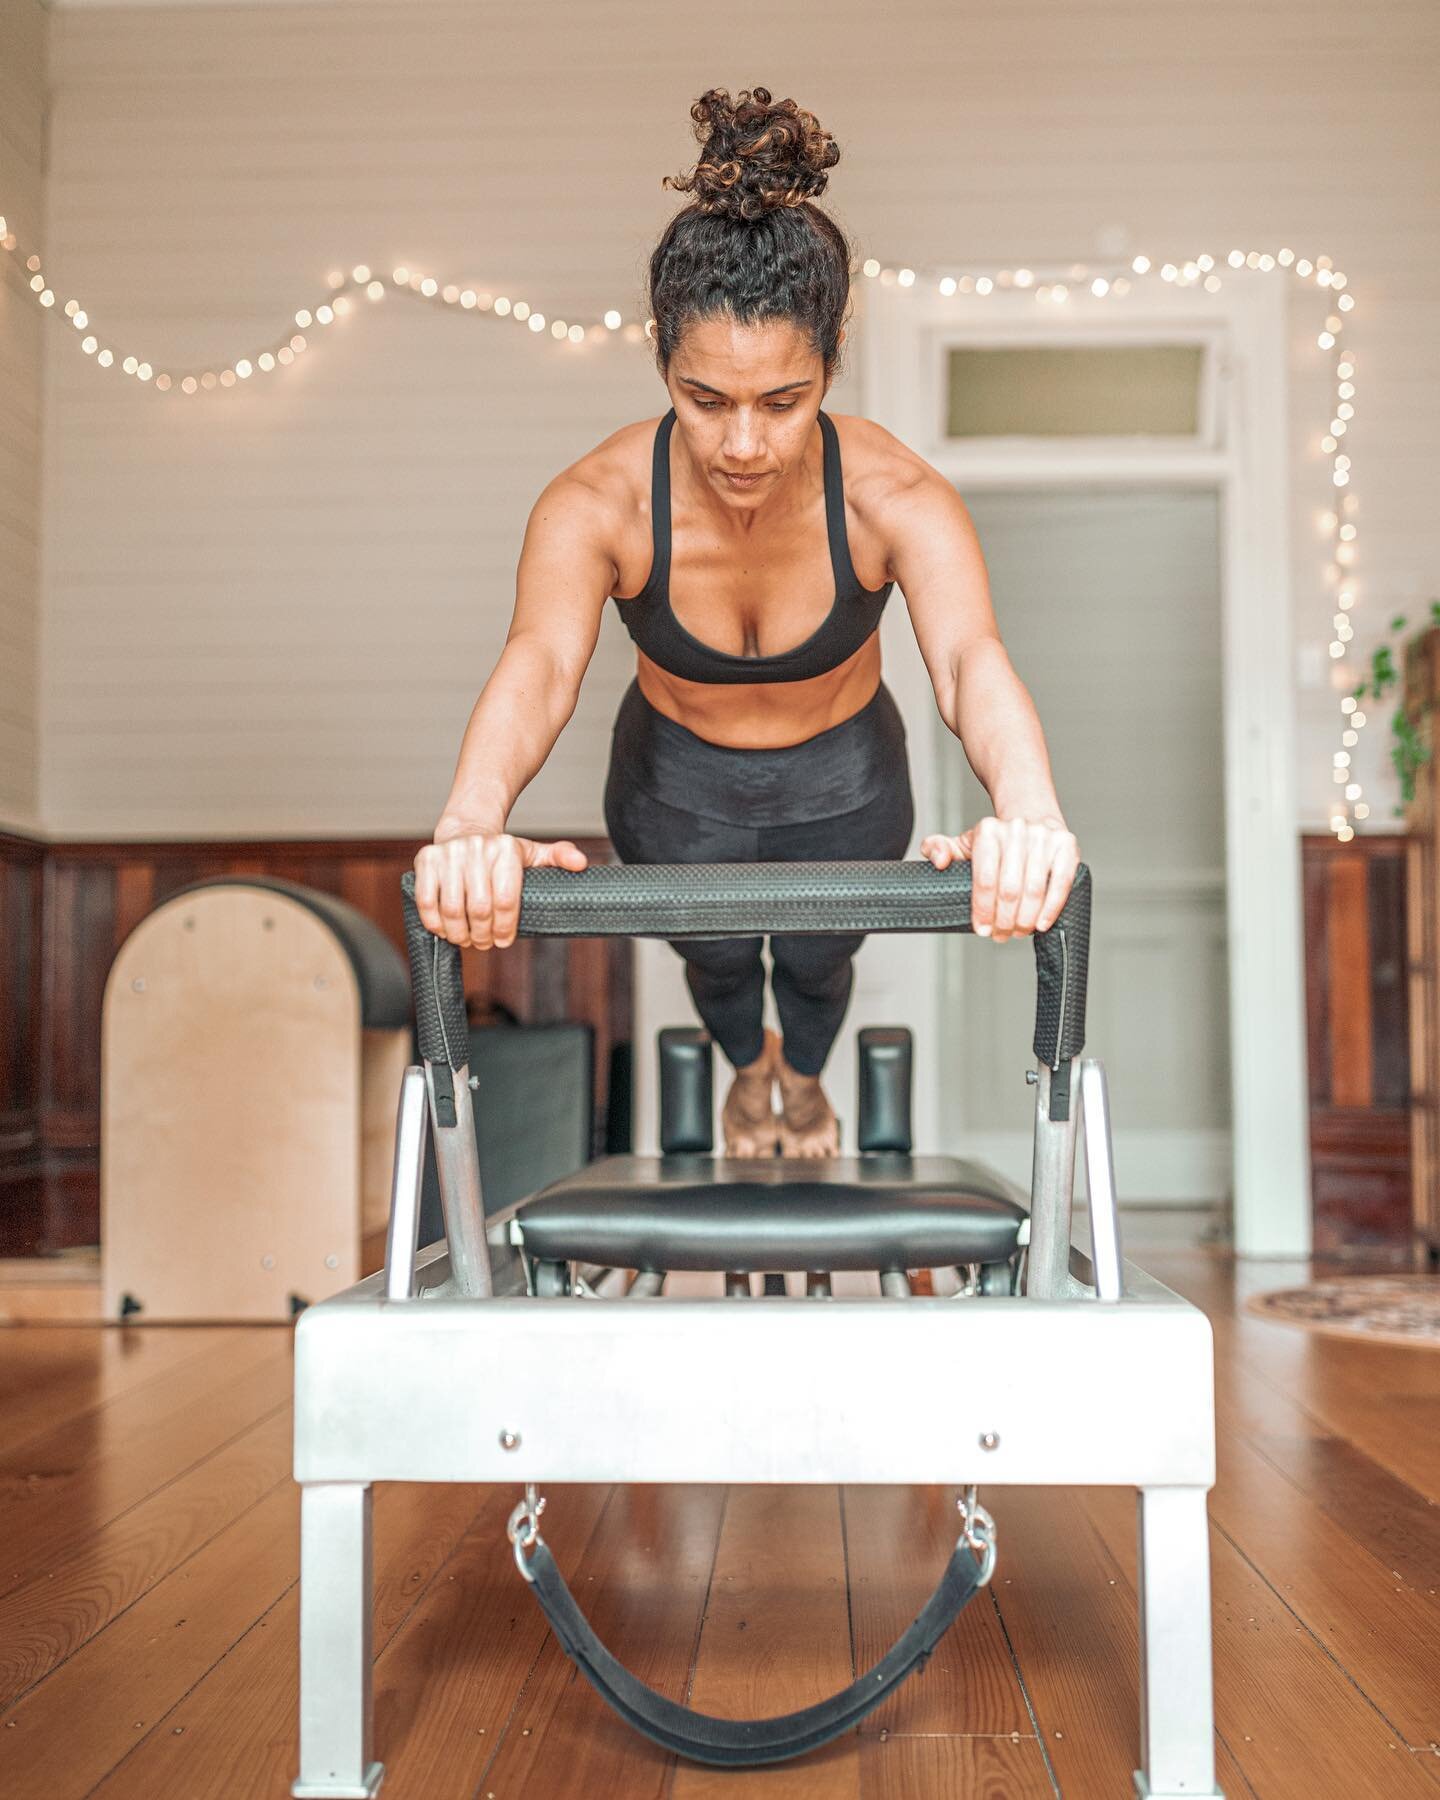 Todays Smooth Sunday is bought to you by the mighty and gorgeous Karina who is just casually Rockin&rsquo; the Longstretch, and making the reformer feel real special.

As you do.

#pilates #pilatesreformer #pilateslovers #pilateseveryday #truepilates